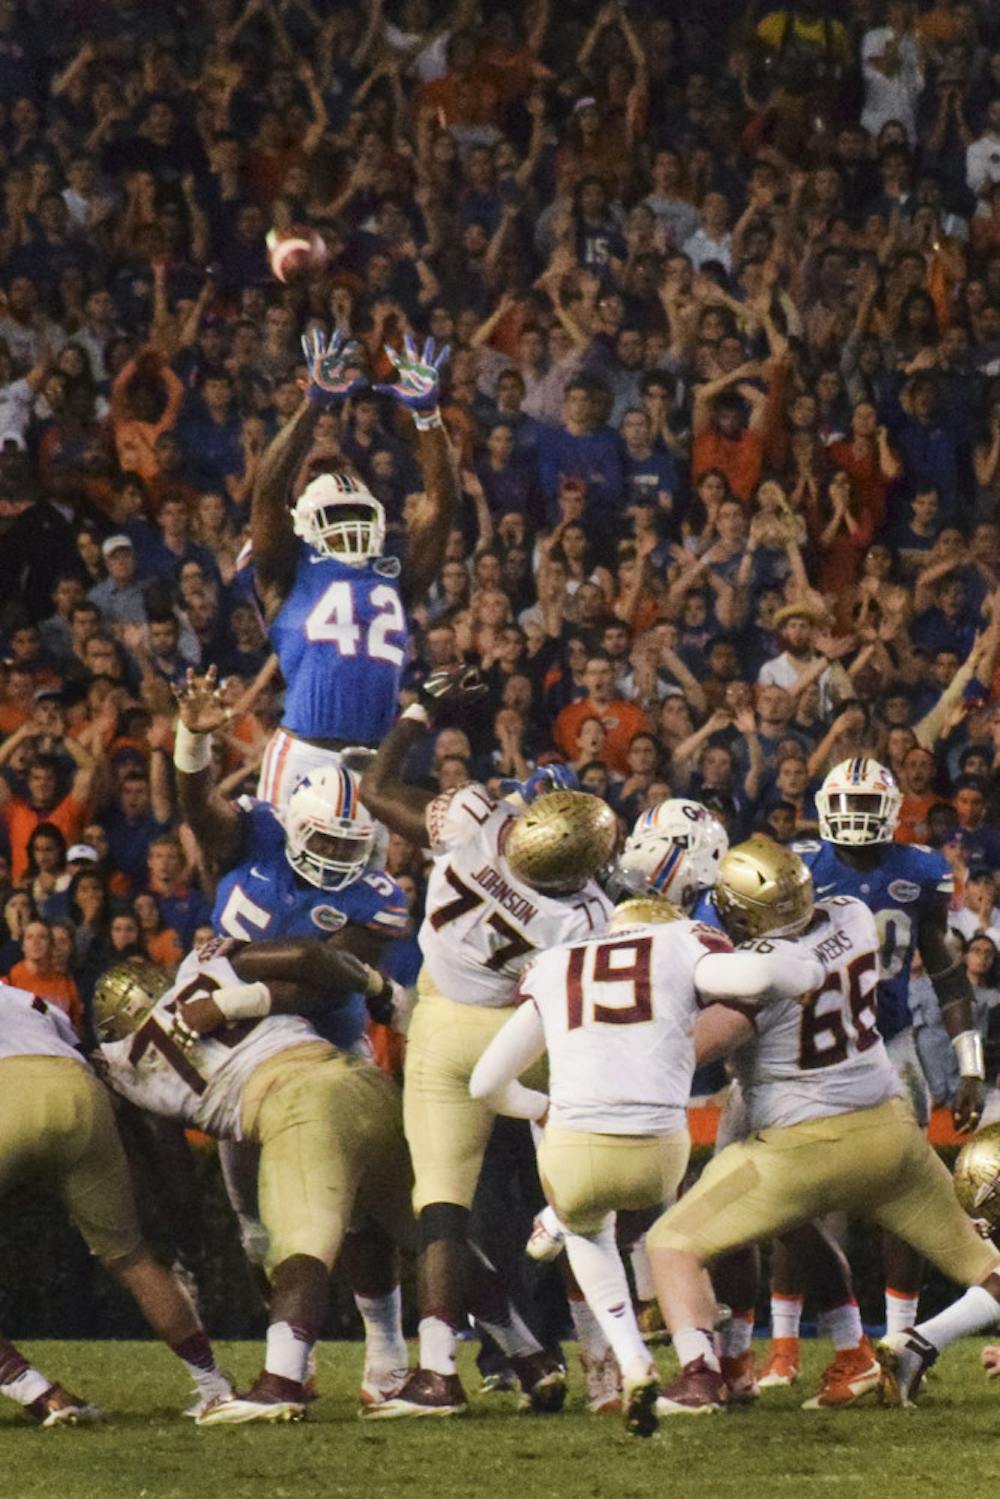 <p>UF safety Keanu Neal (42) jumps in an attempt to block FSU kicker Roberto Aguayo's field goal attempt during Florida's 27-2 loss to Florida State on Nov. 28, 2015, at Ben Hill Griffin Stadium.</p>